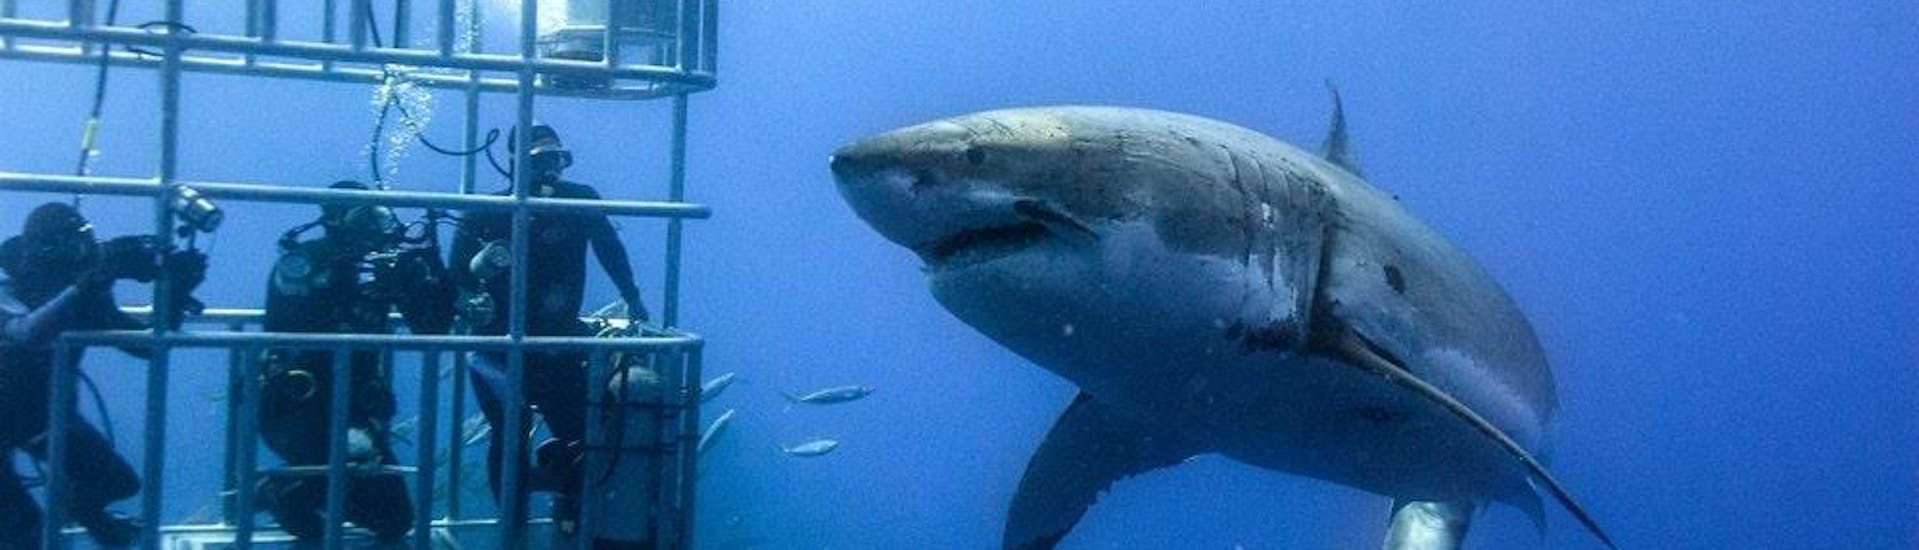 Shark Cage Diving from Cape Town.